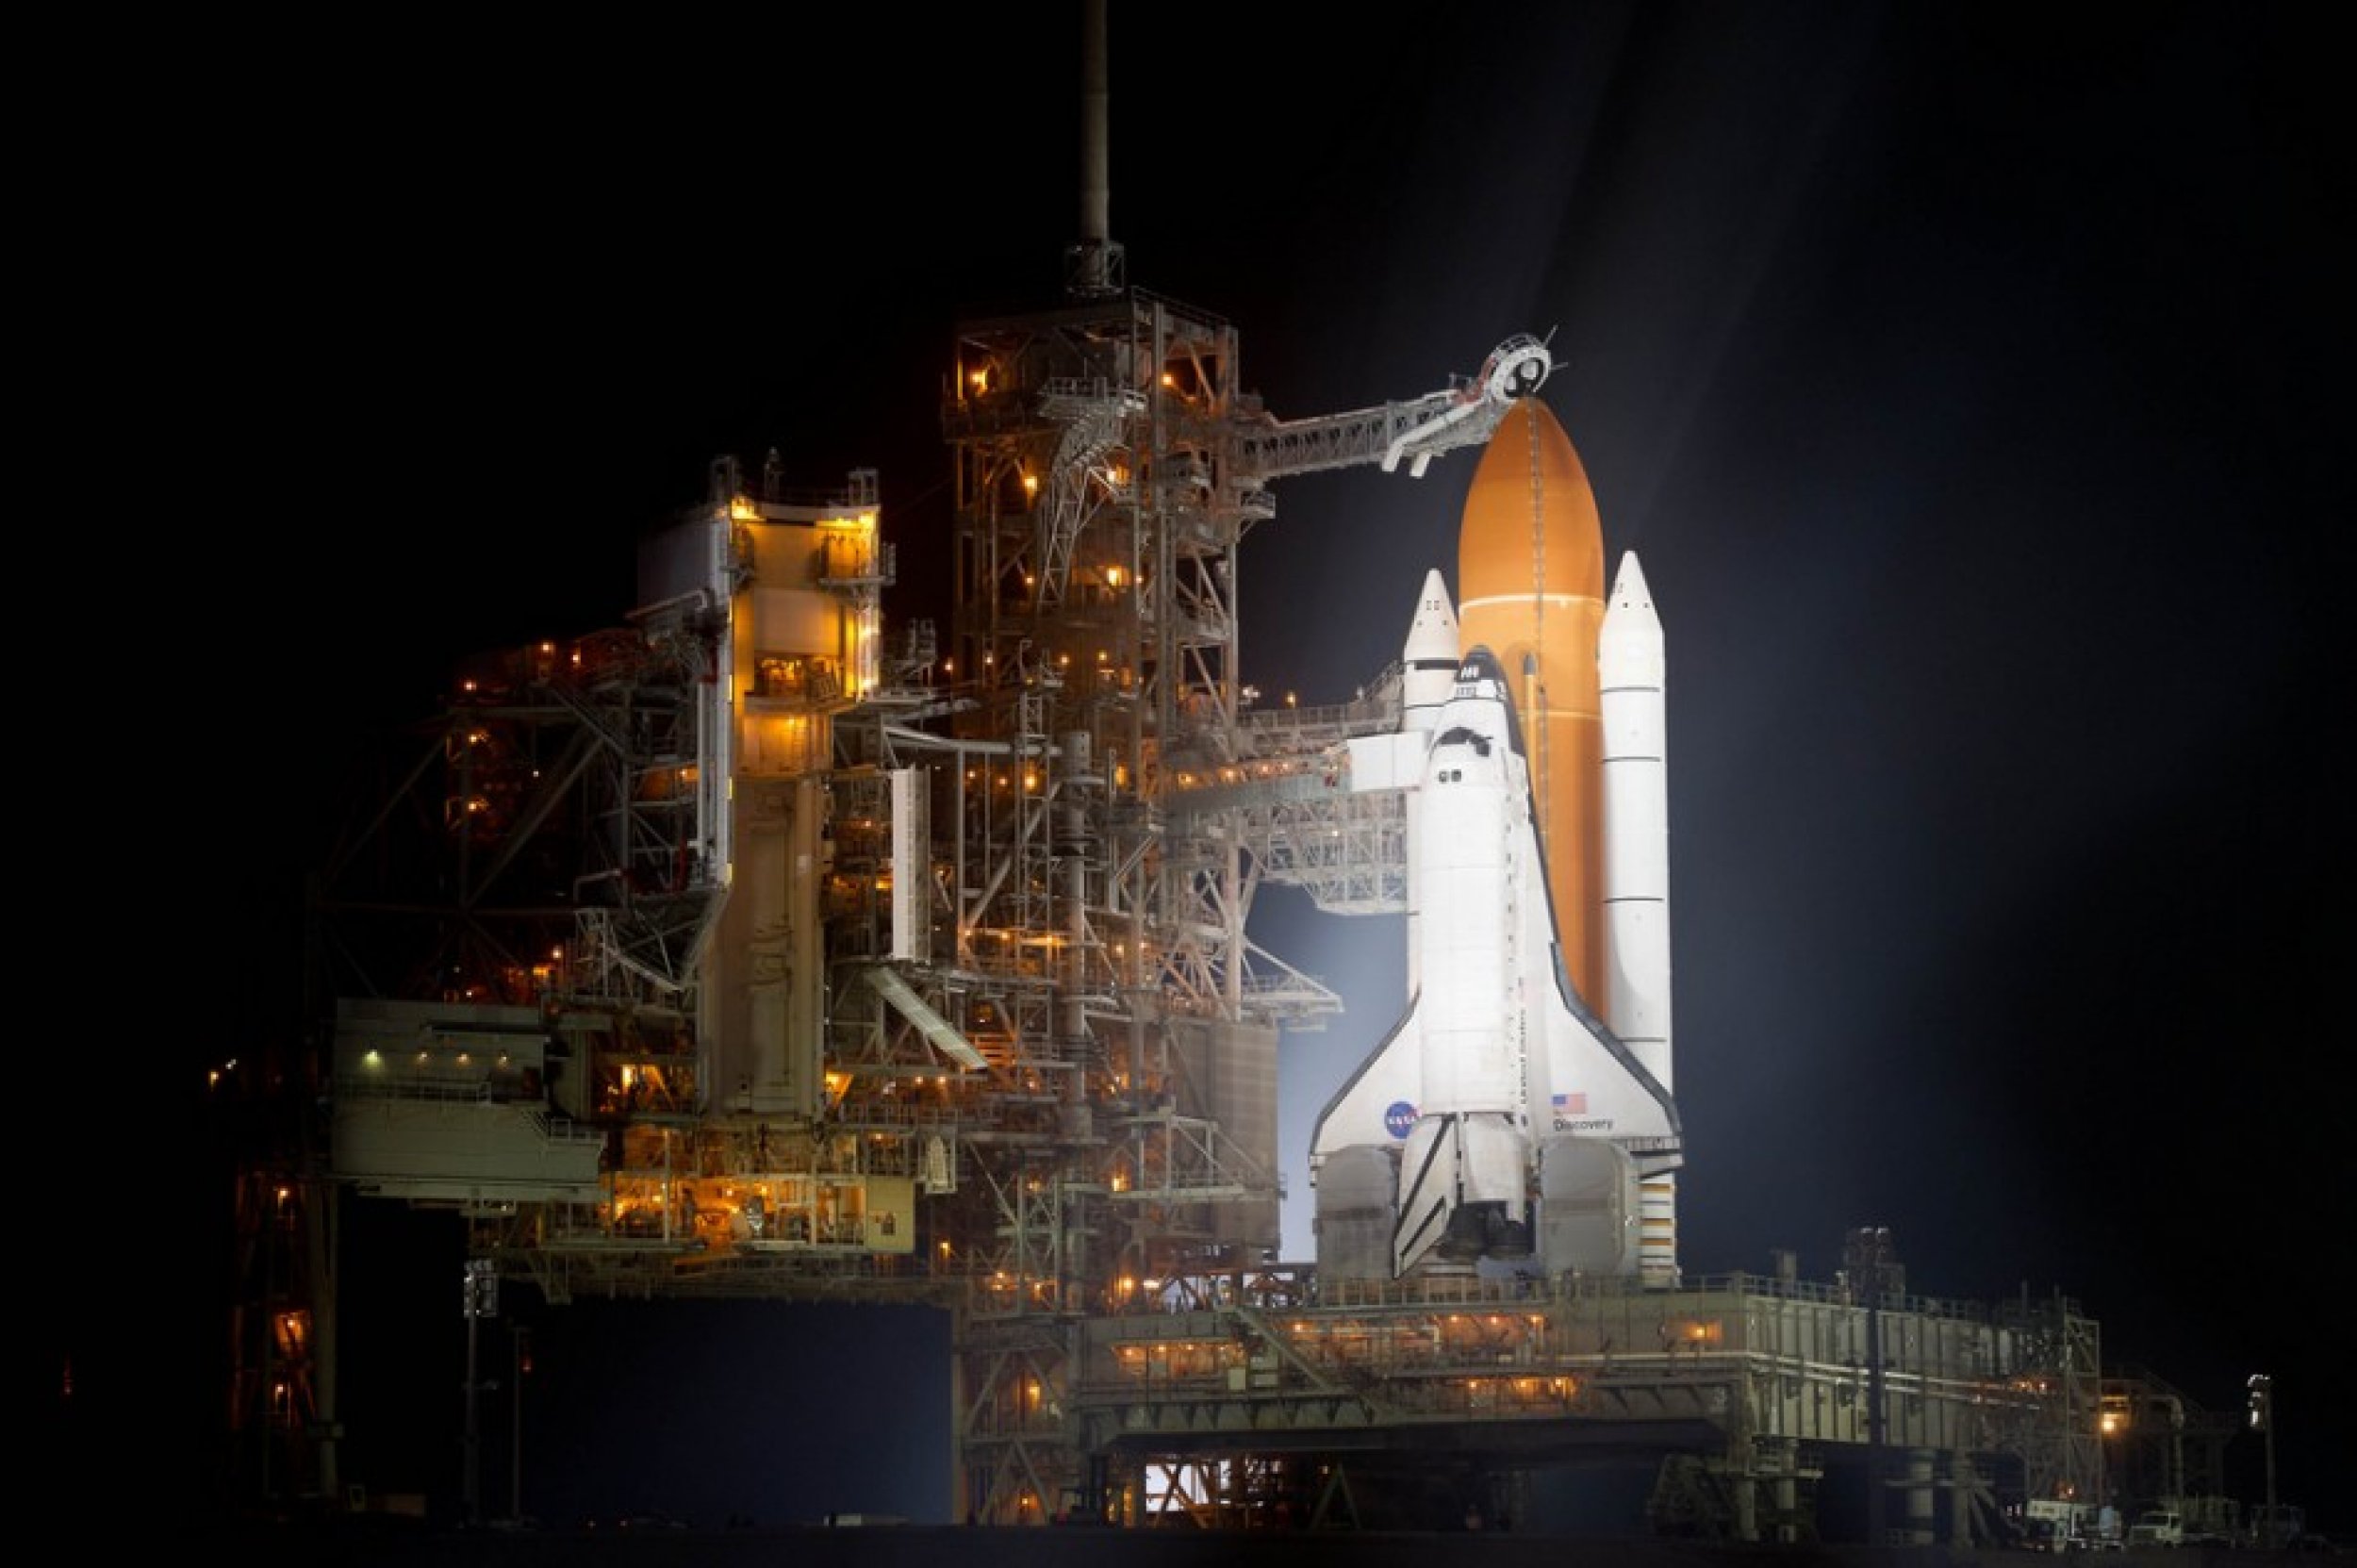 Glimpses before NASAs Discovery Shuttle takes off PHOTOS